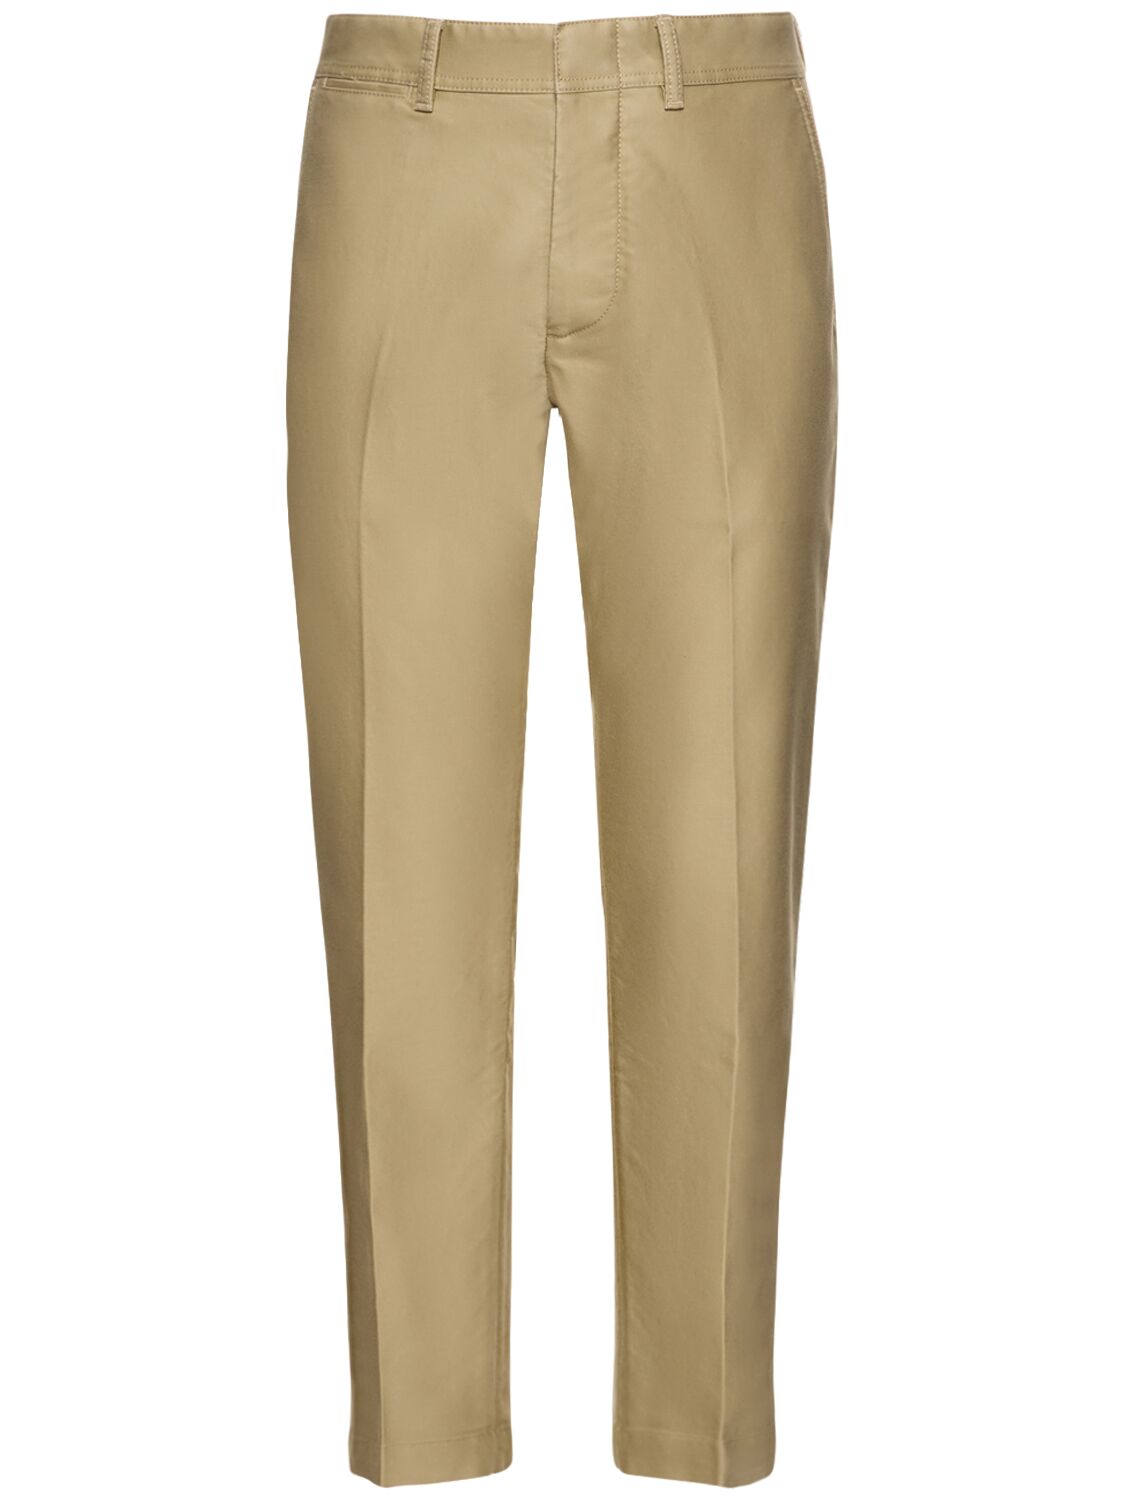 Tom Ford Compact Cotton Chino Pants In Washed Beige